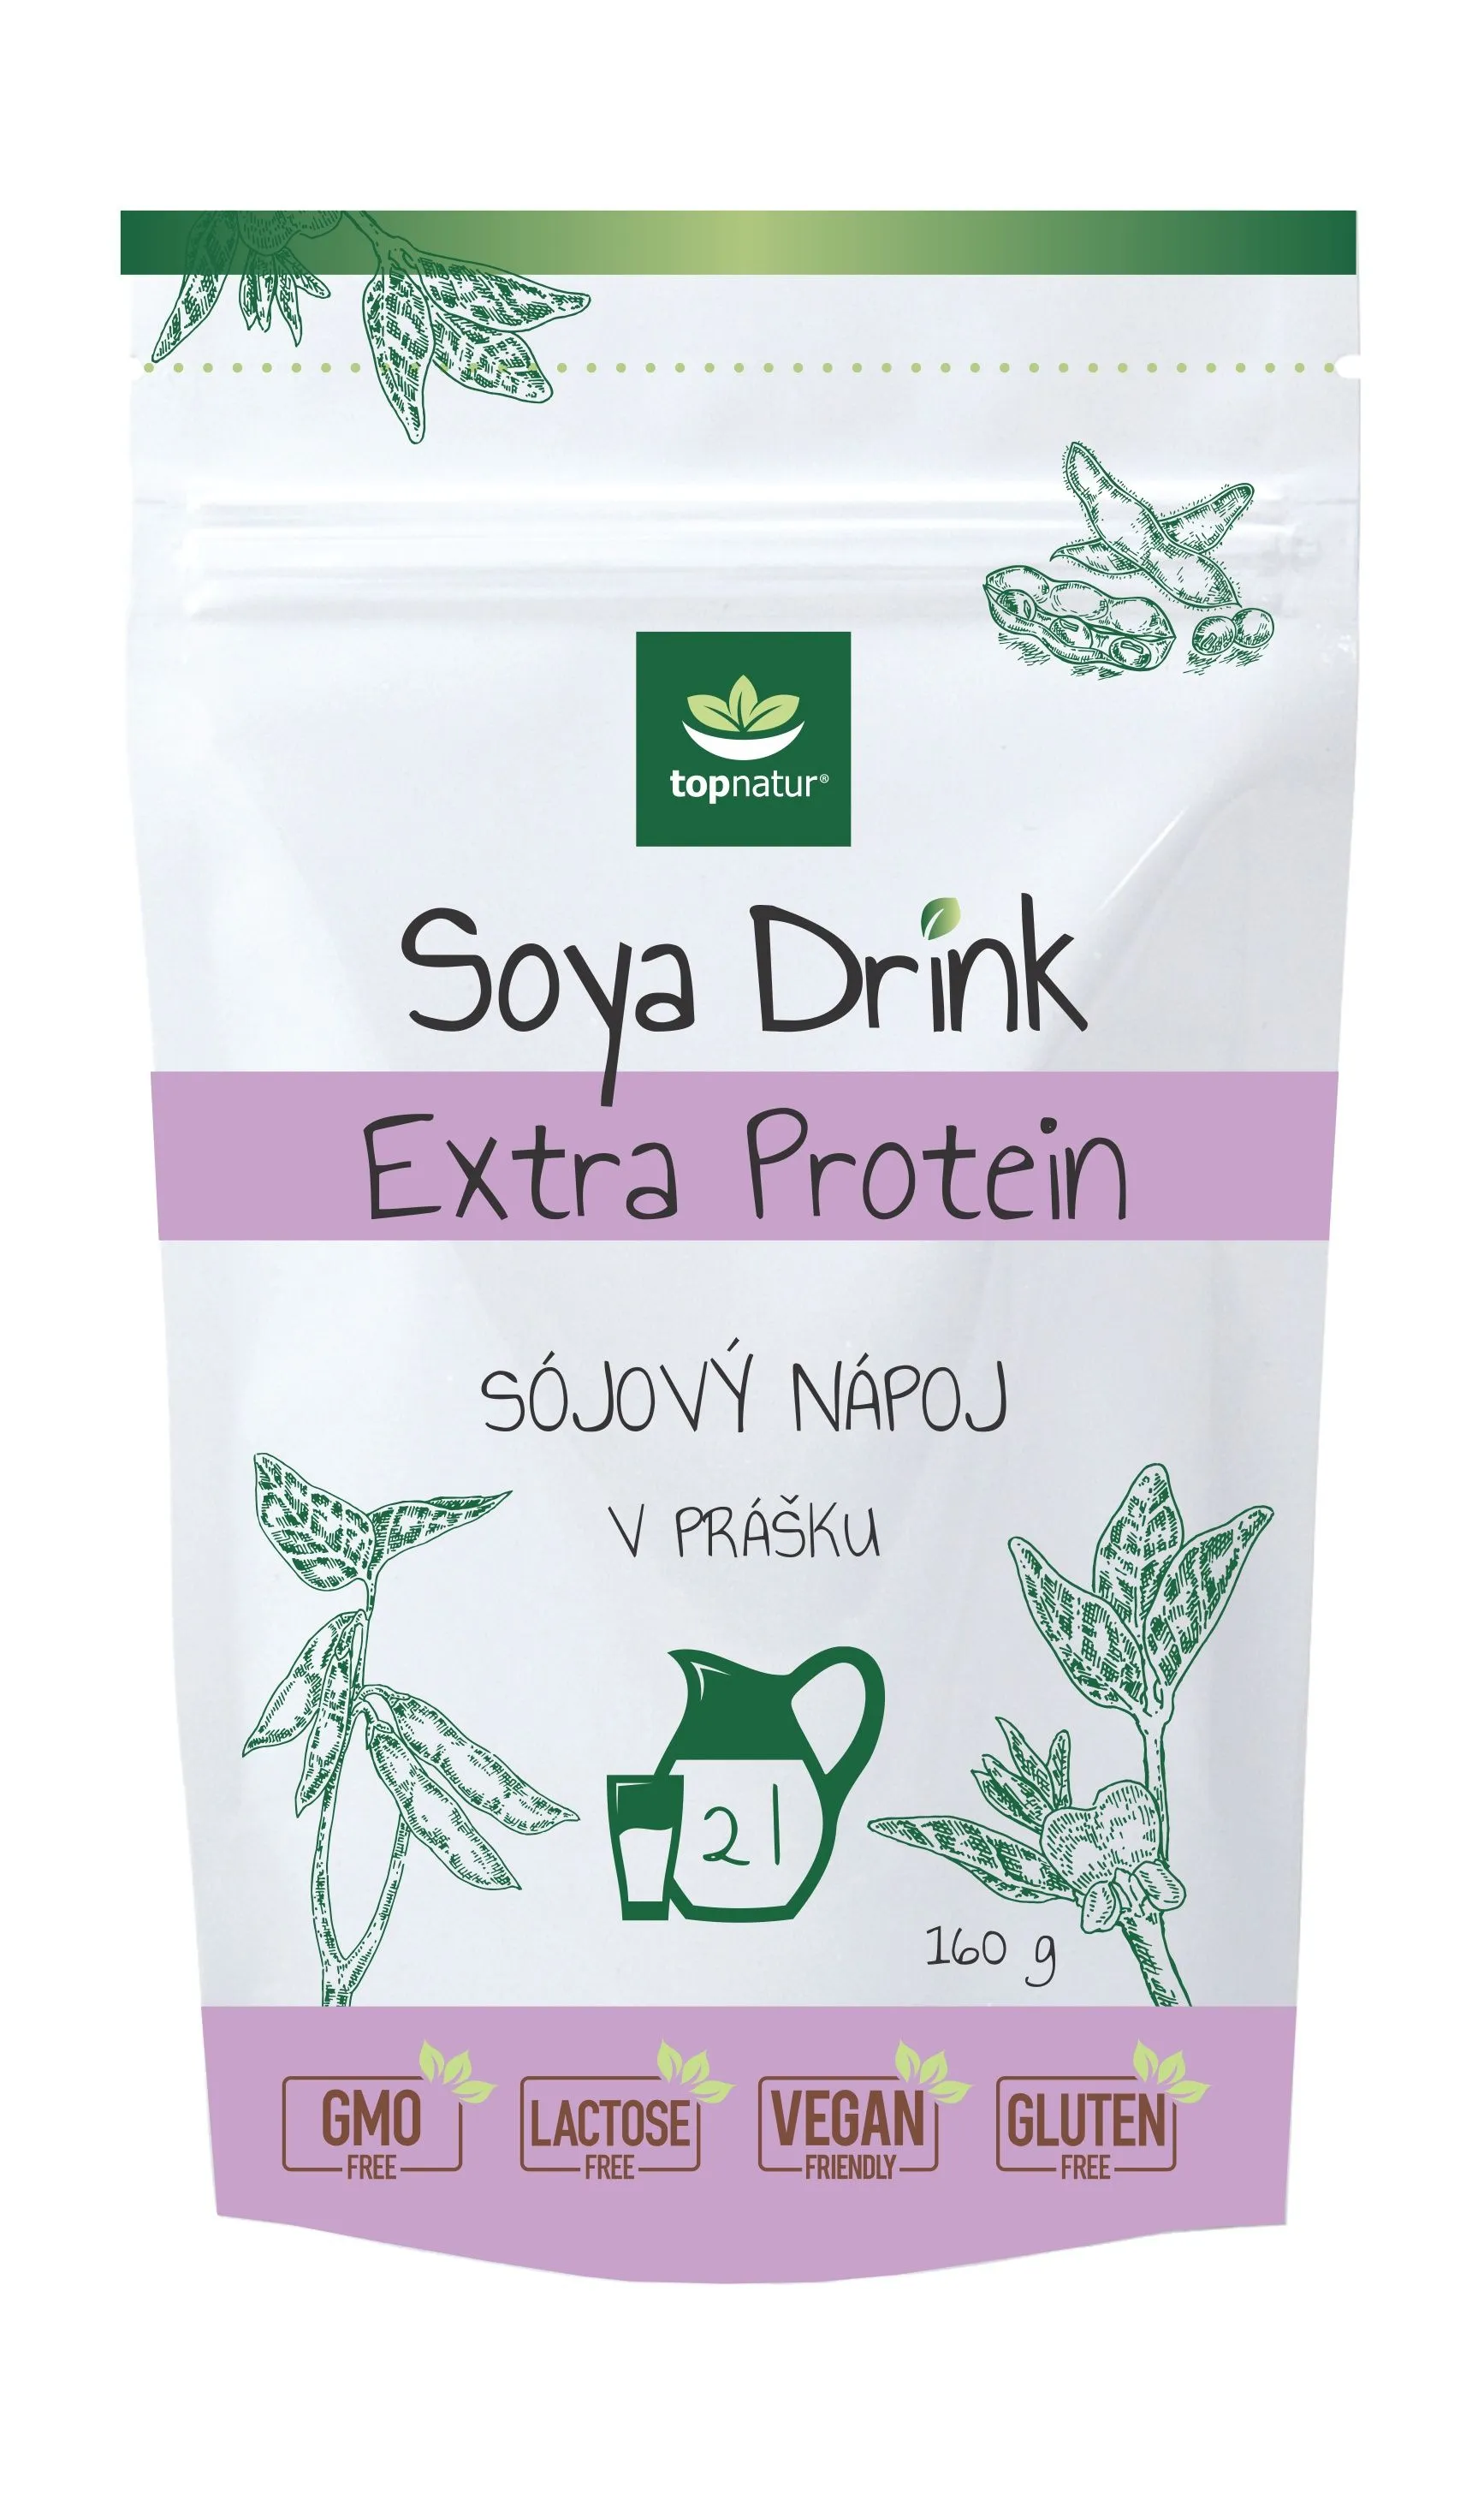 Topnatur Soya Drink Extra protein 160 g